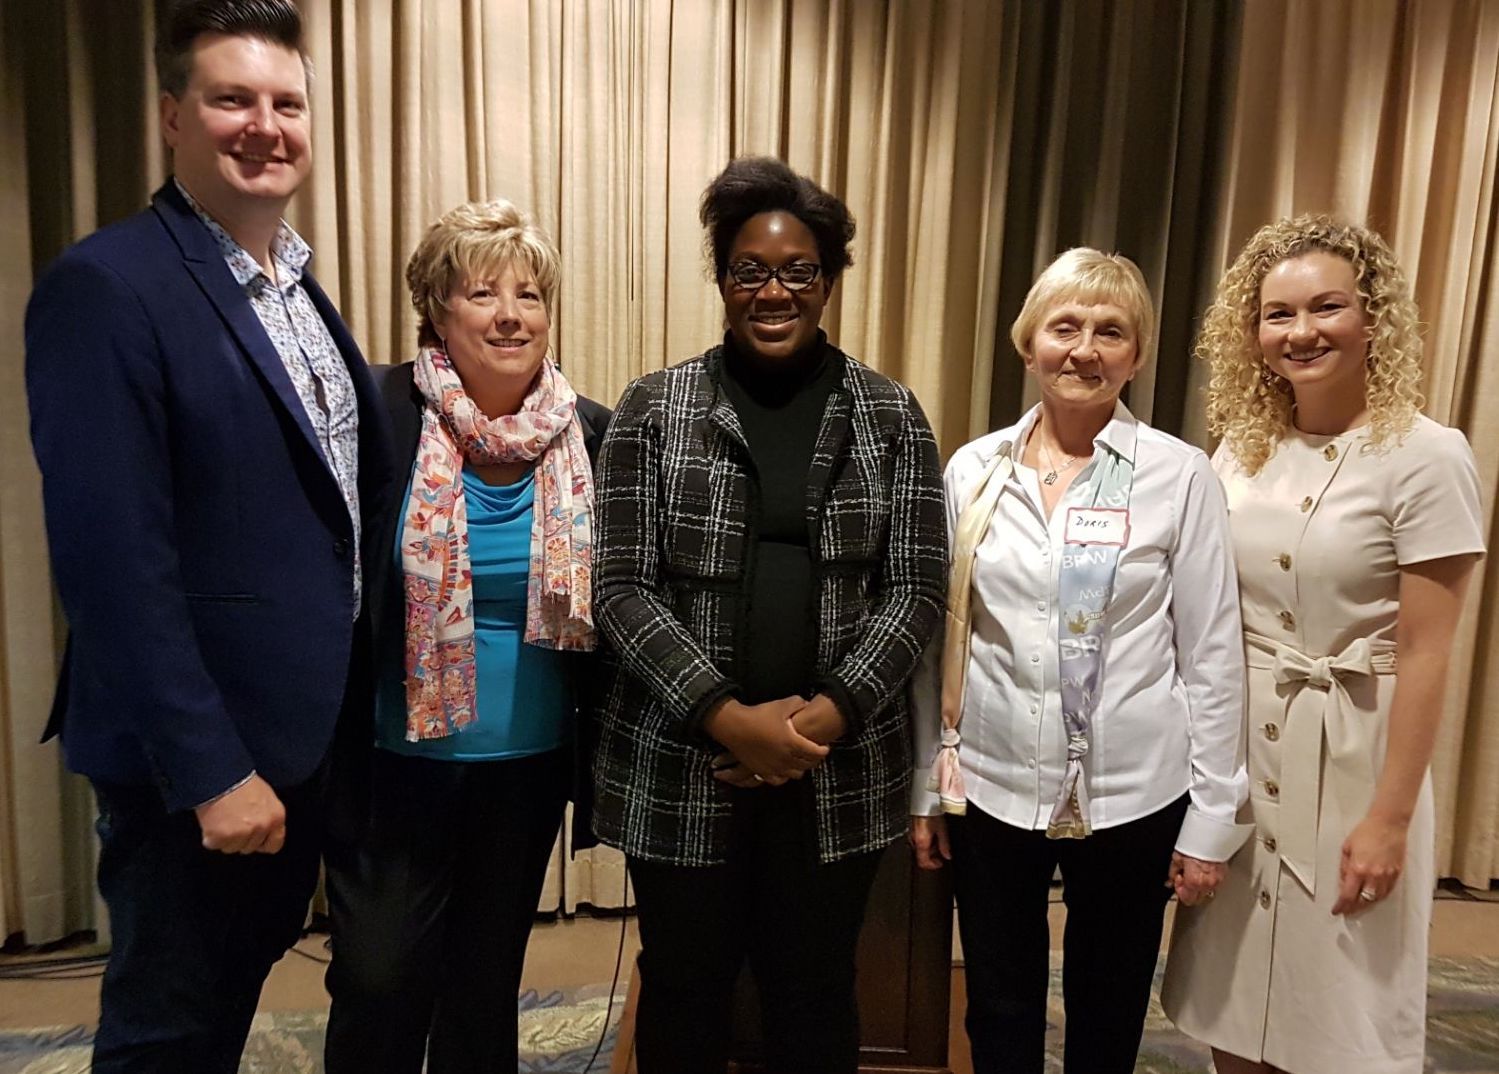 L-R: Andrew Crook, Managing Partner and Broker of Record PC275, Panellist; Sheila Crook, CCEW Coach & Facilitator; Stephanie Dei, We Empower Canada, Panel Moderator; Doris Hall CCEW event MC; Melissa McInerney, CEO & Chief Creative Officer, tbk